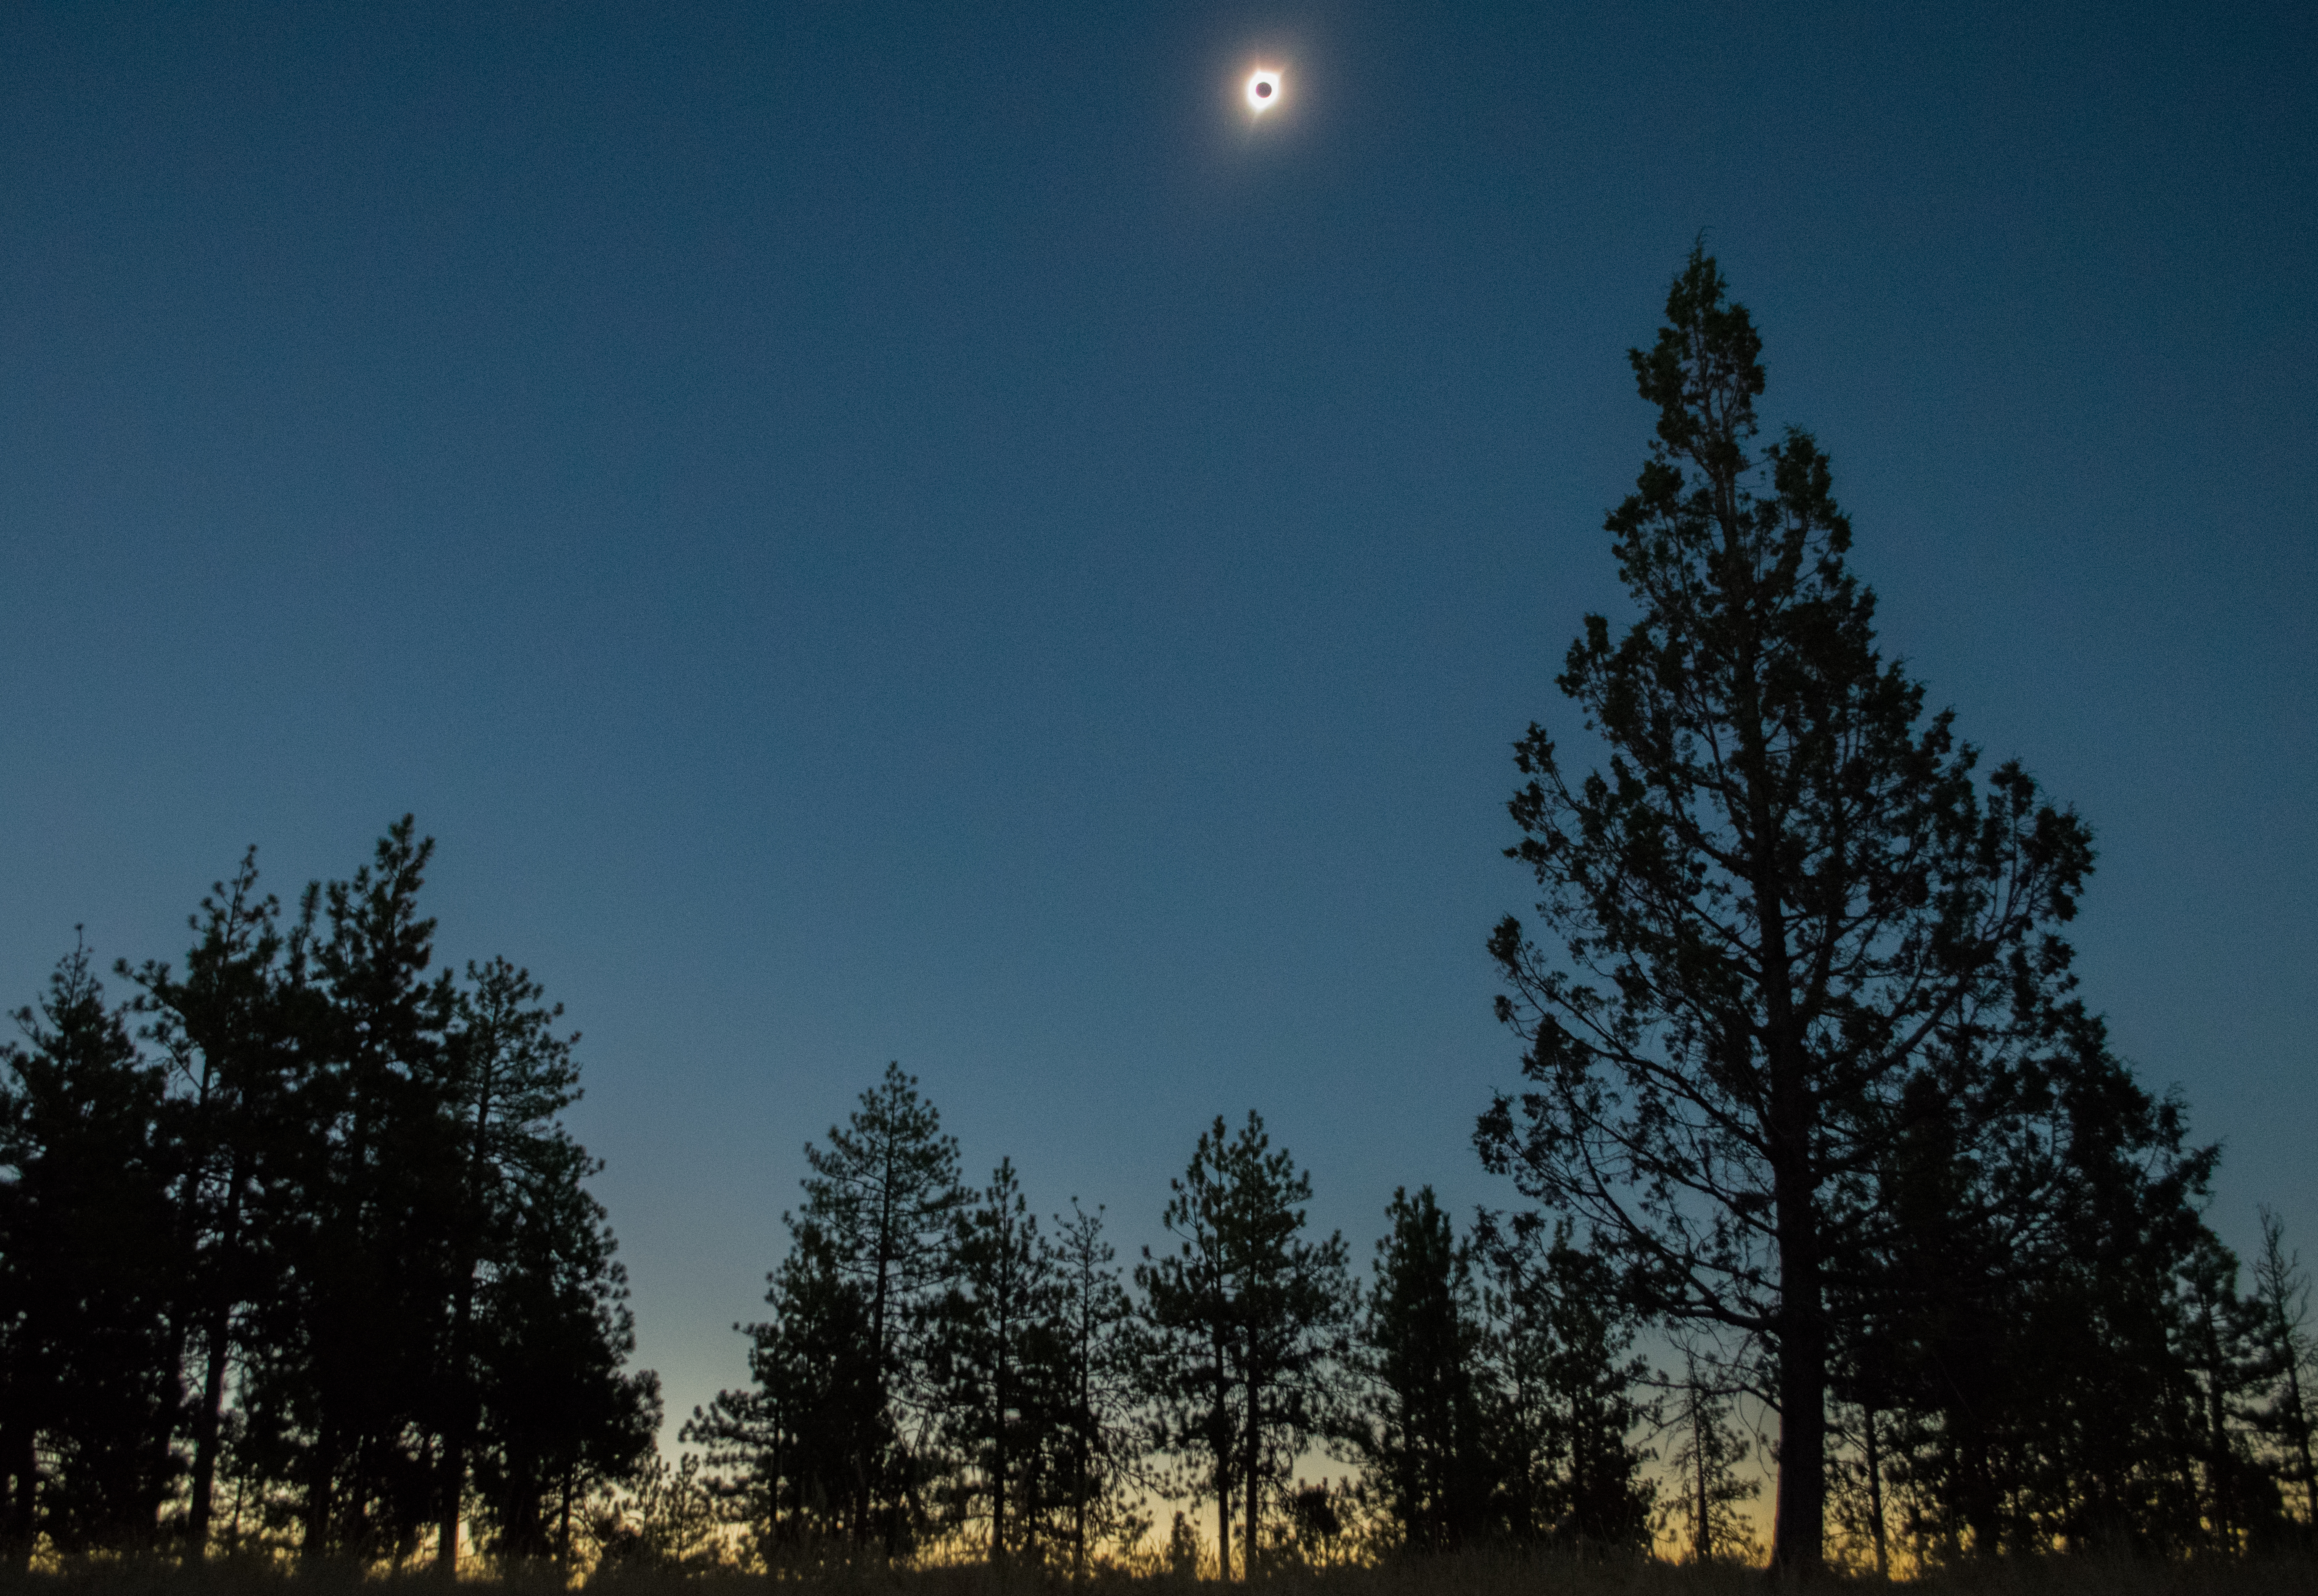 A group of trees, shown in black silhouette, line the bottom of the image. The sky fades from dark blue to light orange from the top to the bottom of the image. At the top, an annular eclipse, shown as a small black dot with a bright ring of white around it.